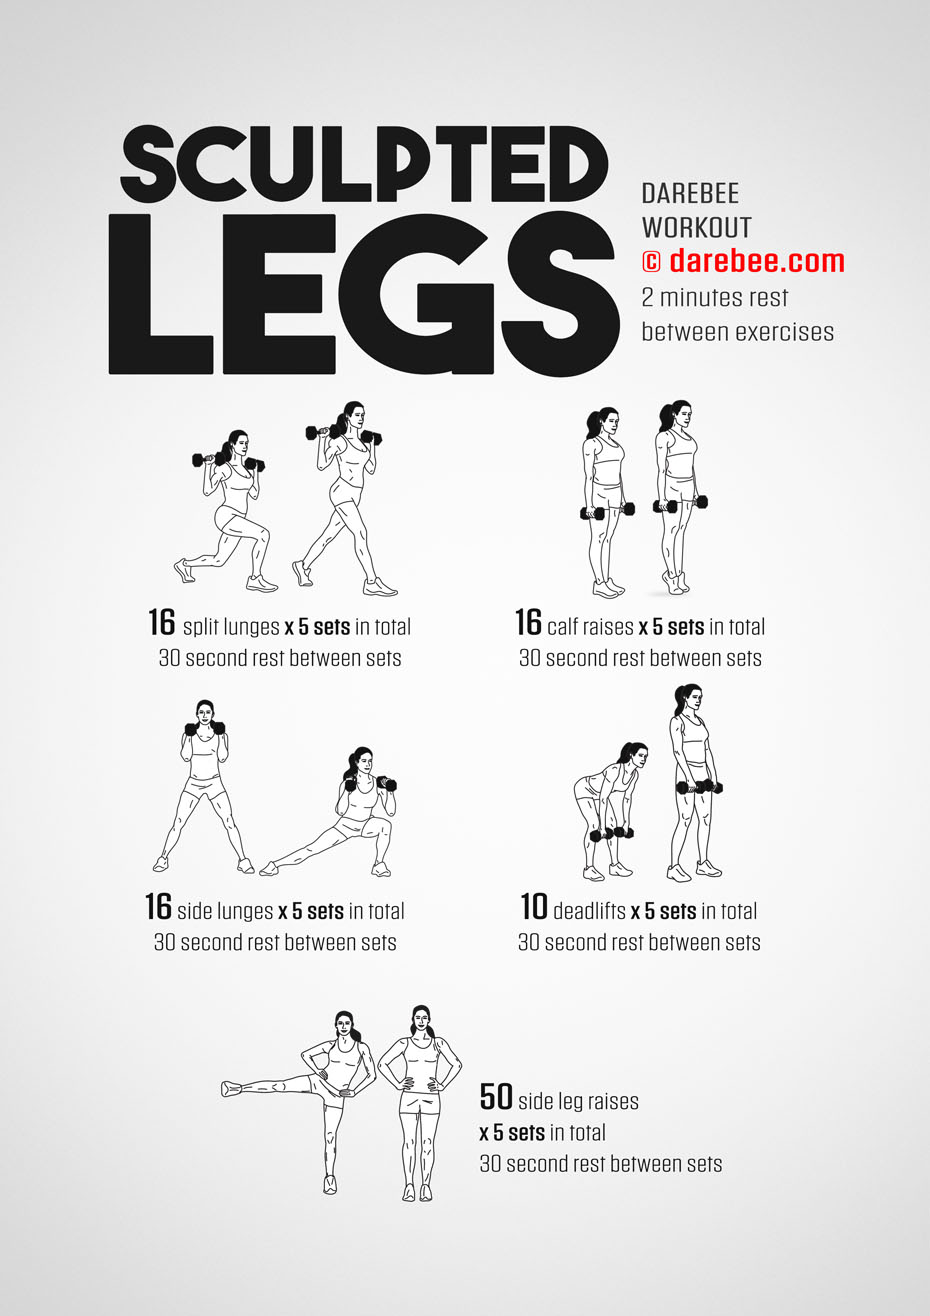 Sculpted Legs is a Darebee home-fitness workout that uses a couple of dumbbells to help you get stronger legs.